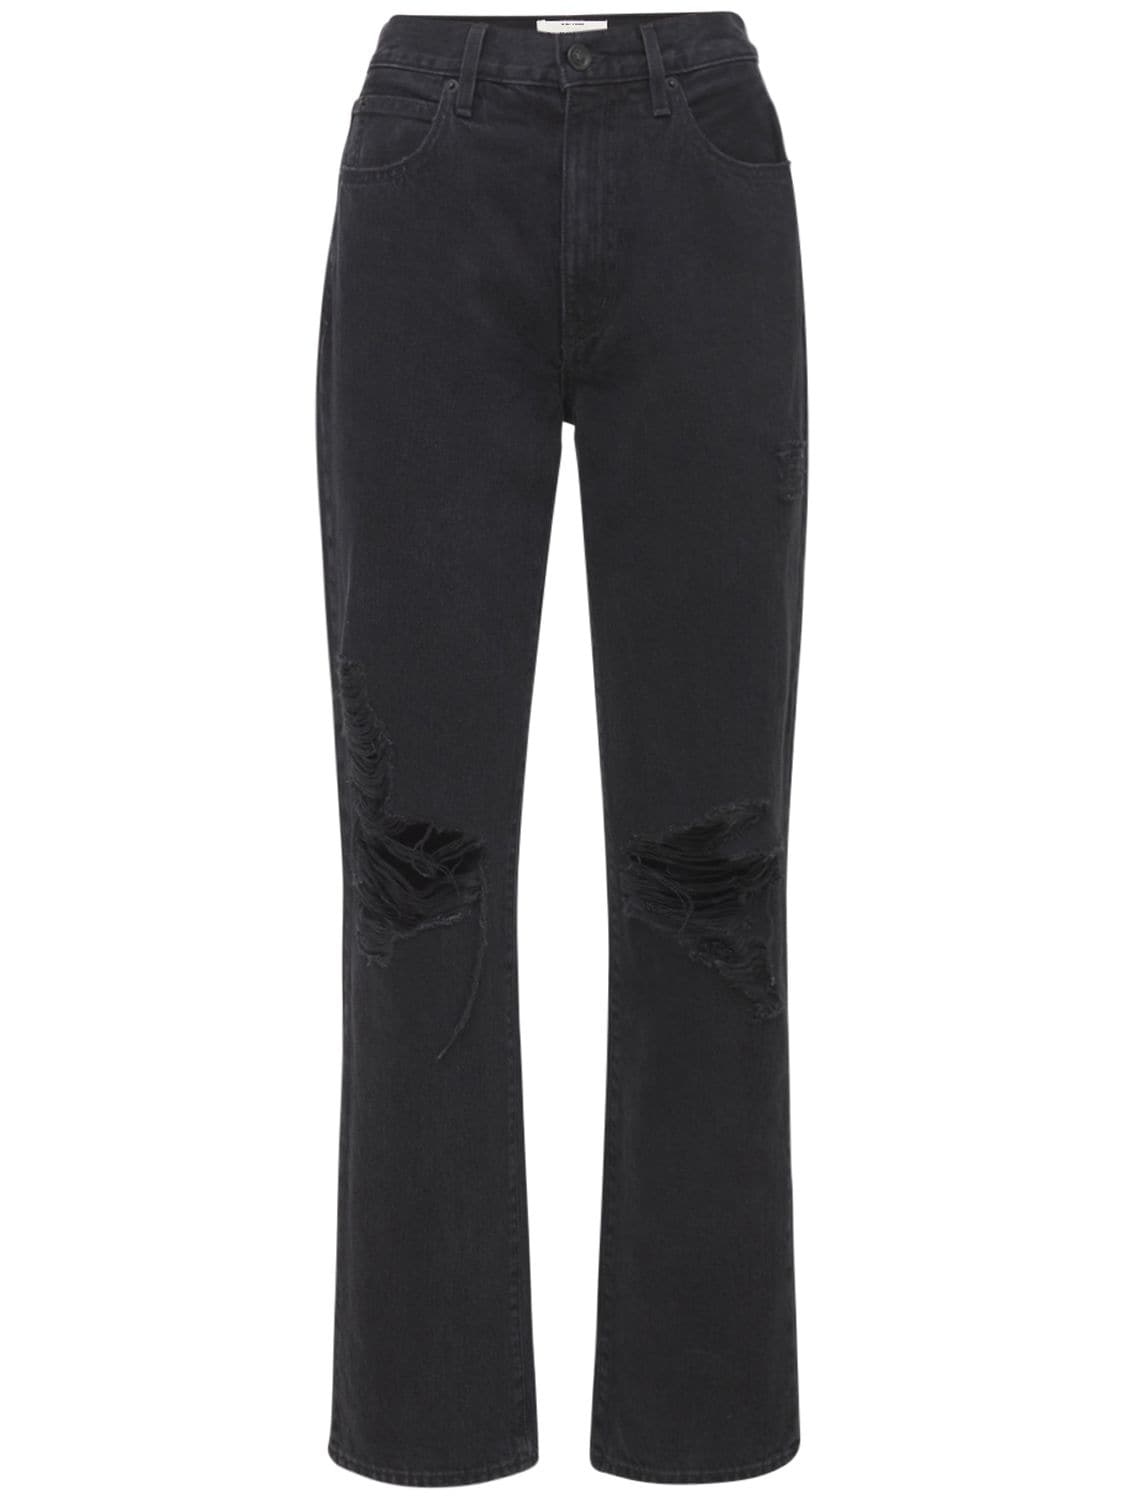 London High Rise Straight Cotton Jeans